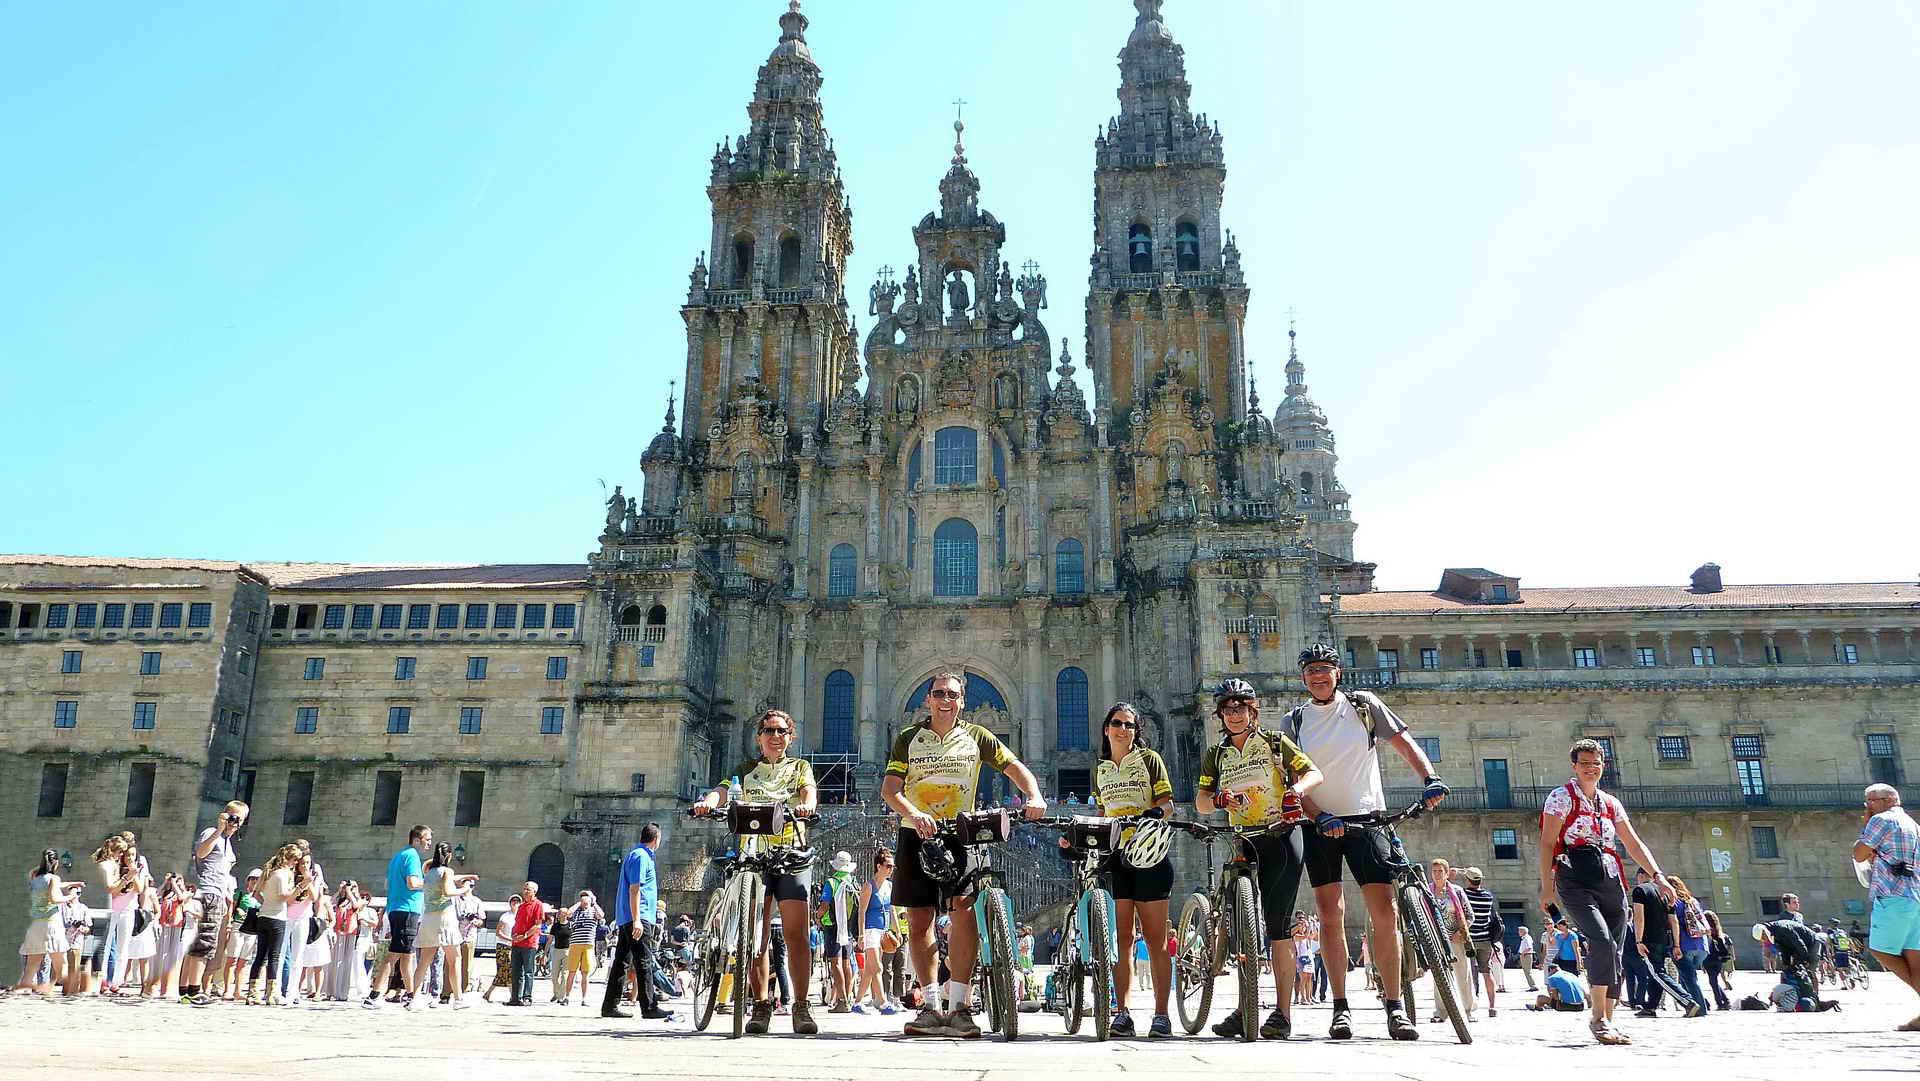 Cycling the Camino de Santiago, one of the World's oldest pilgrimage routes